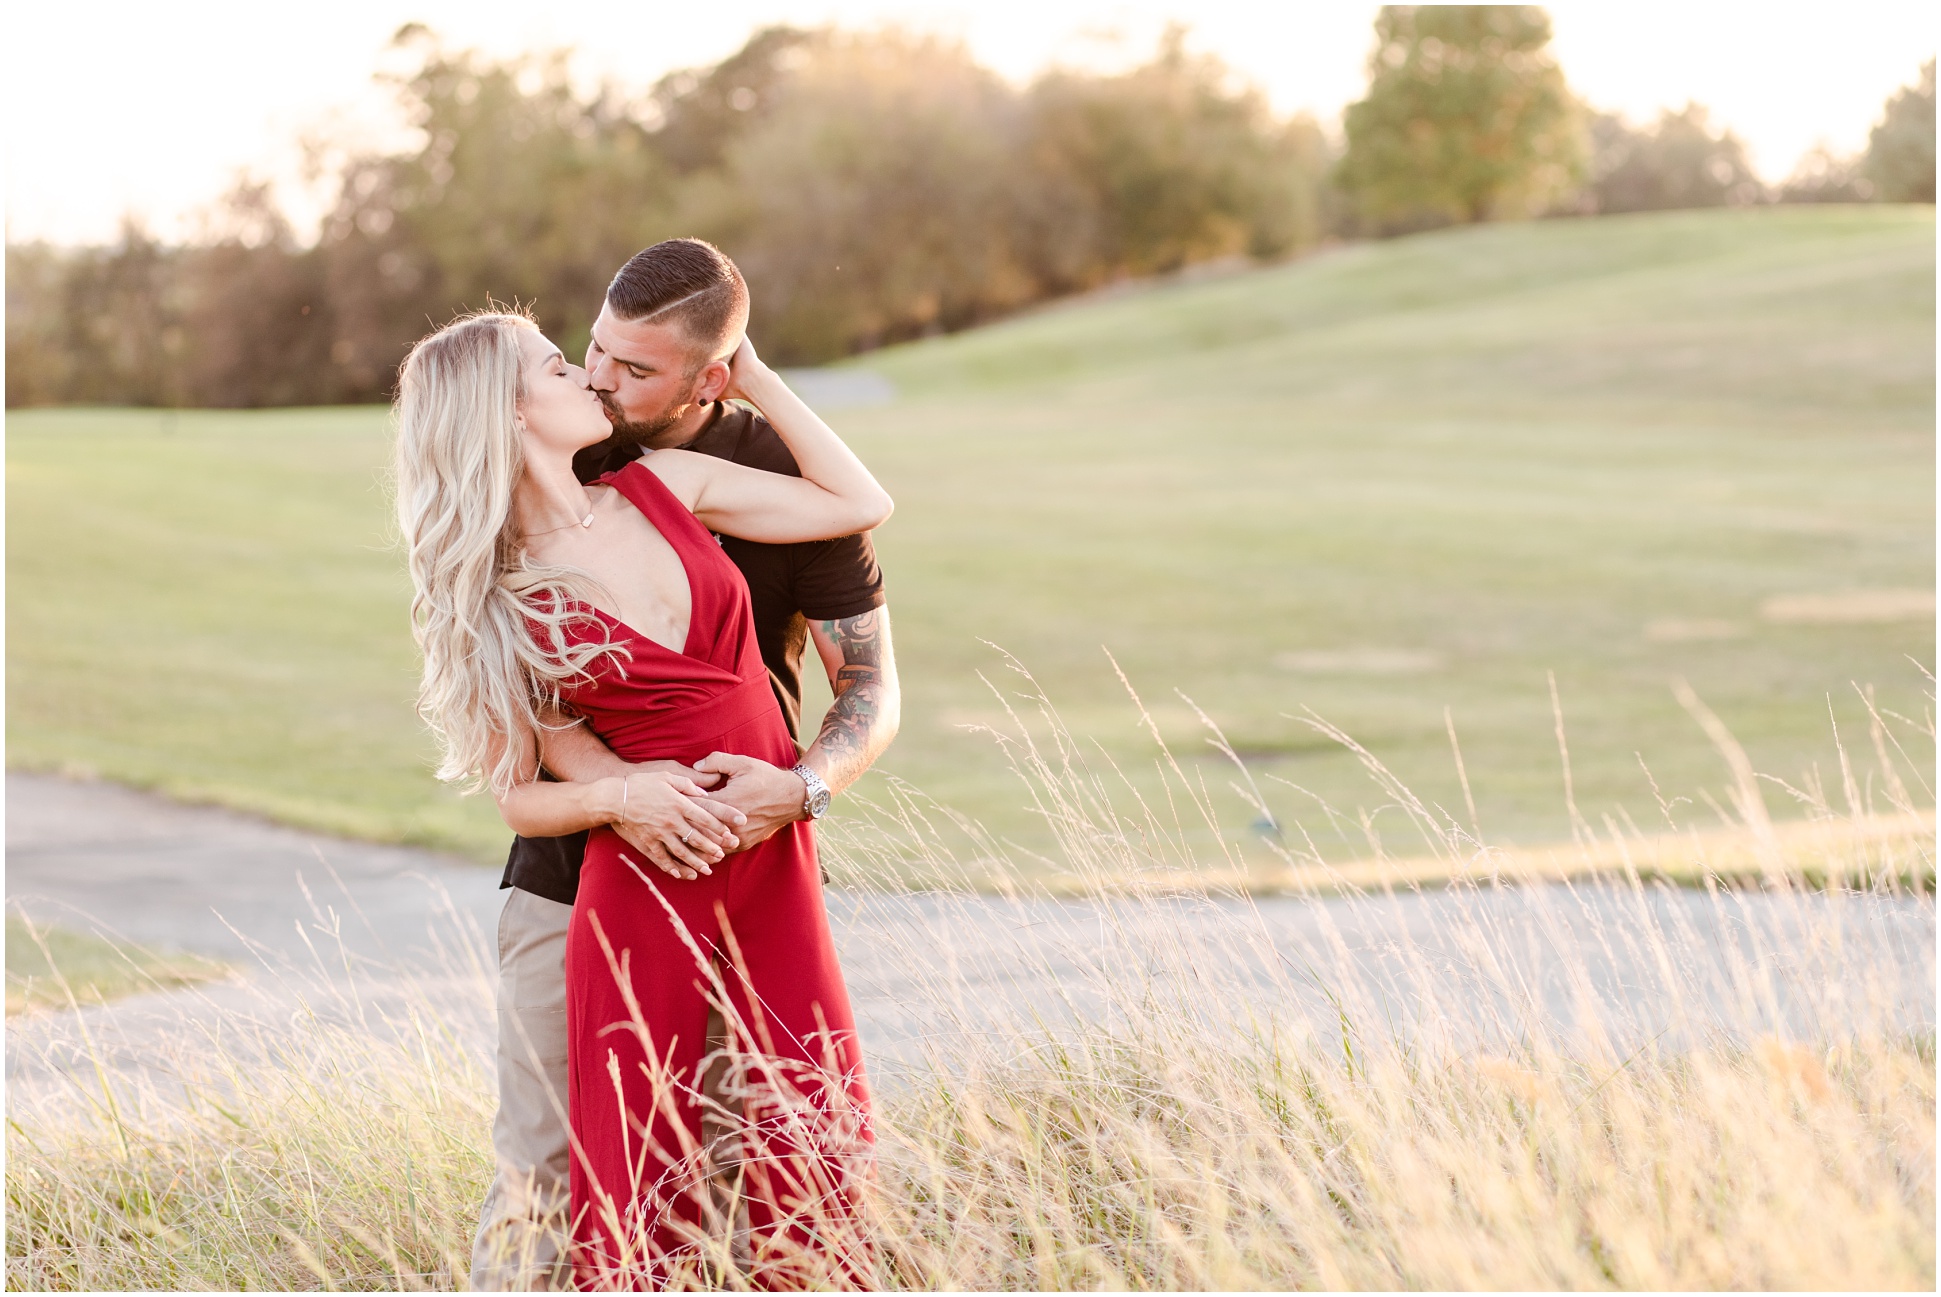 Golf course engagement session at Greystone